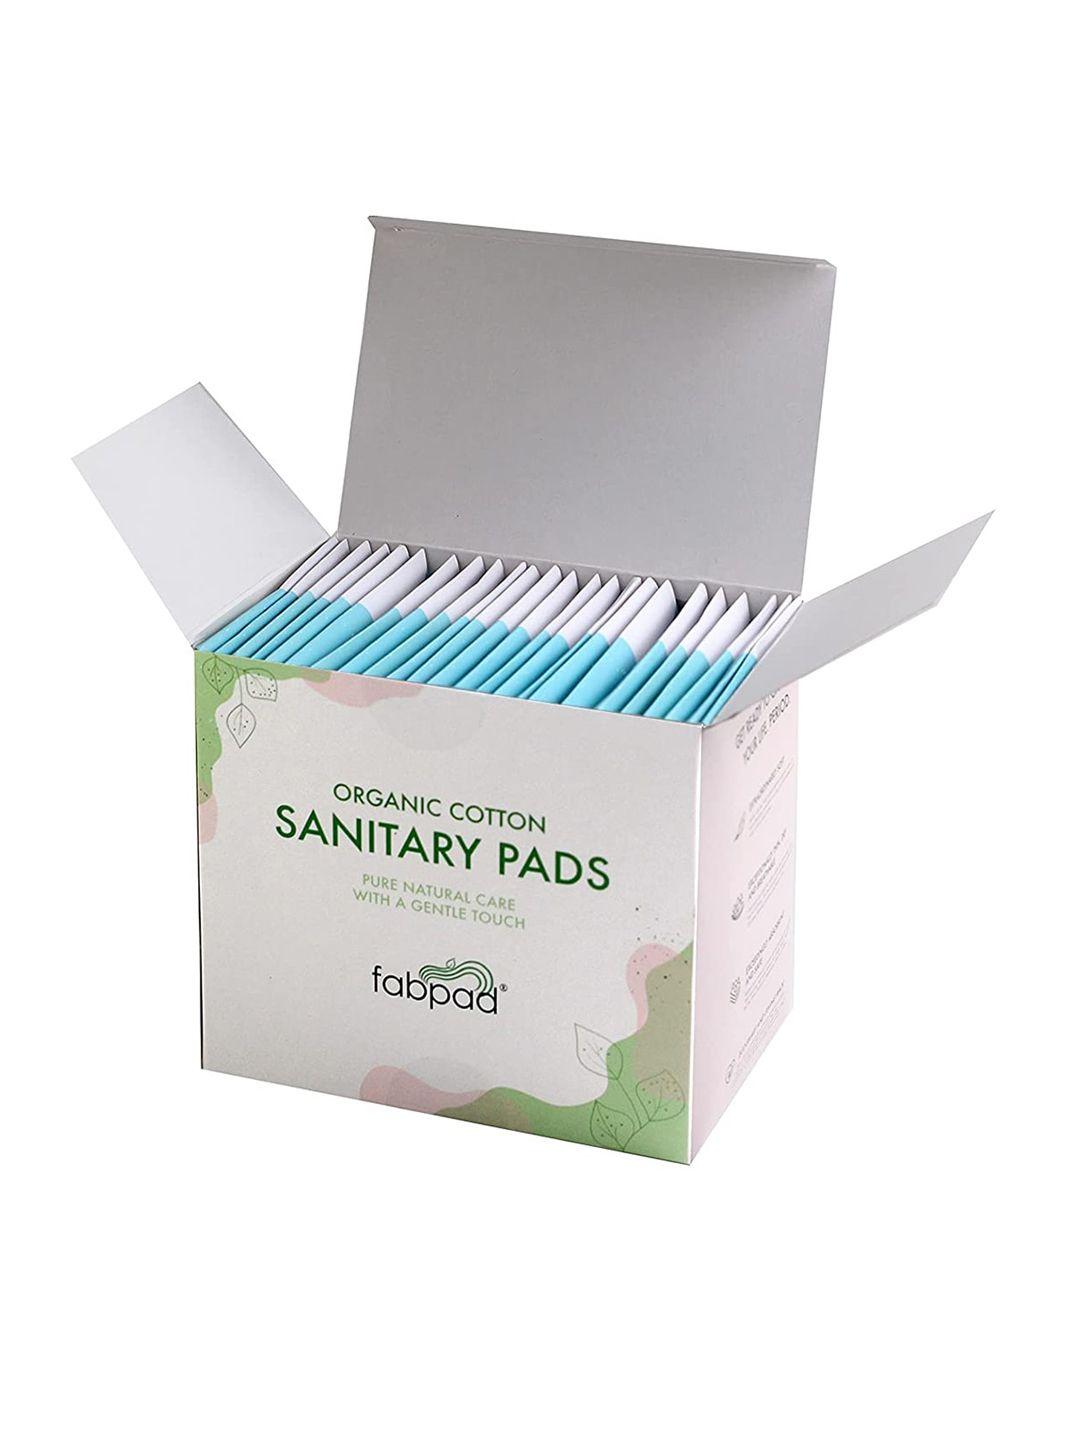 fabpad set of 24 organic cotton ultra thin light flow sanitary pads with disposable cover